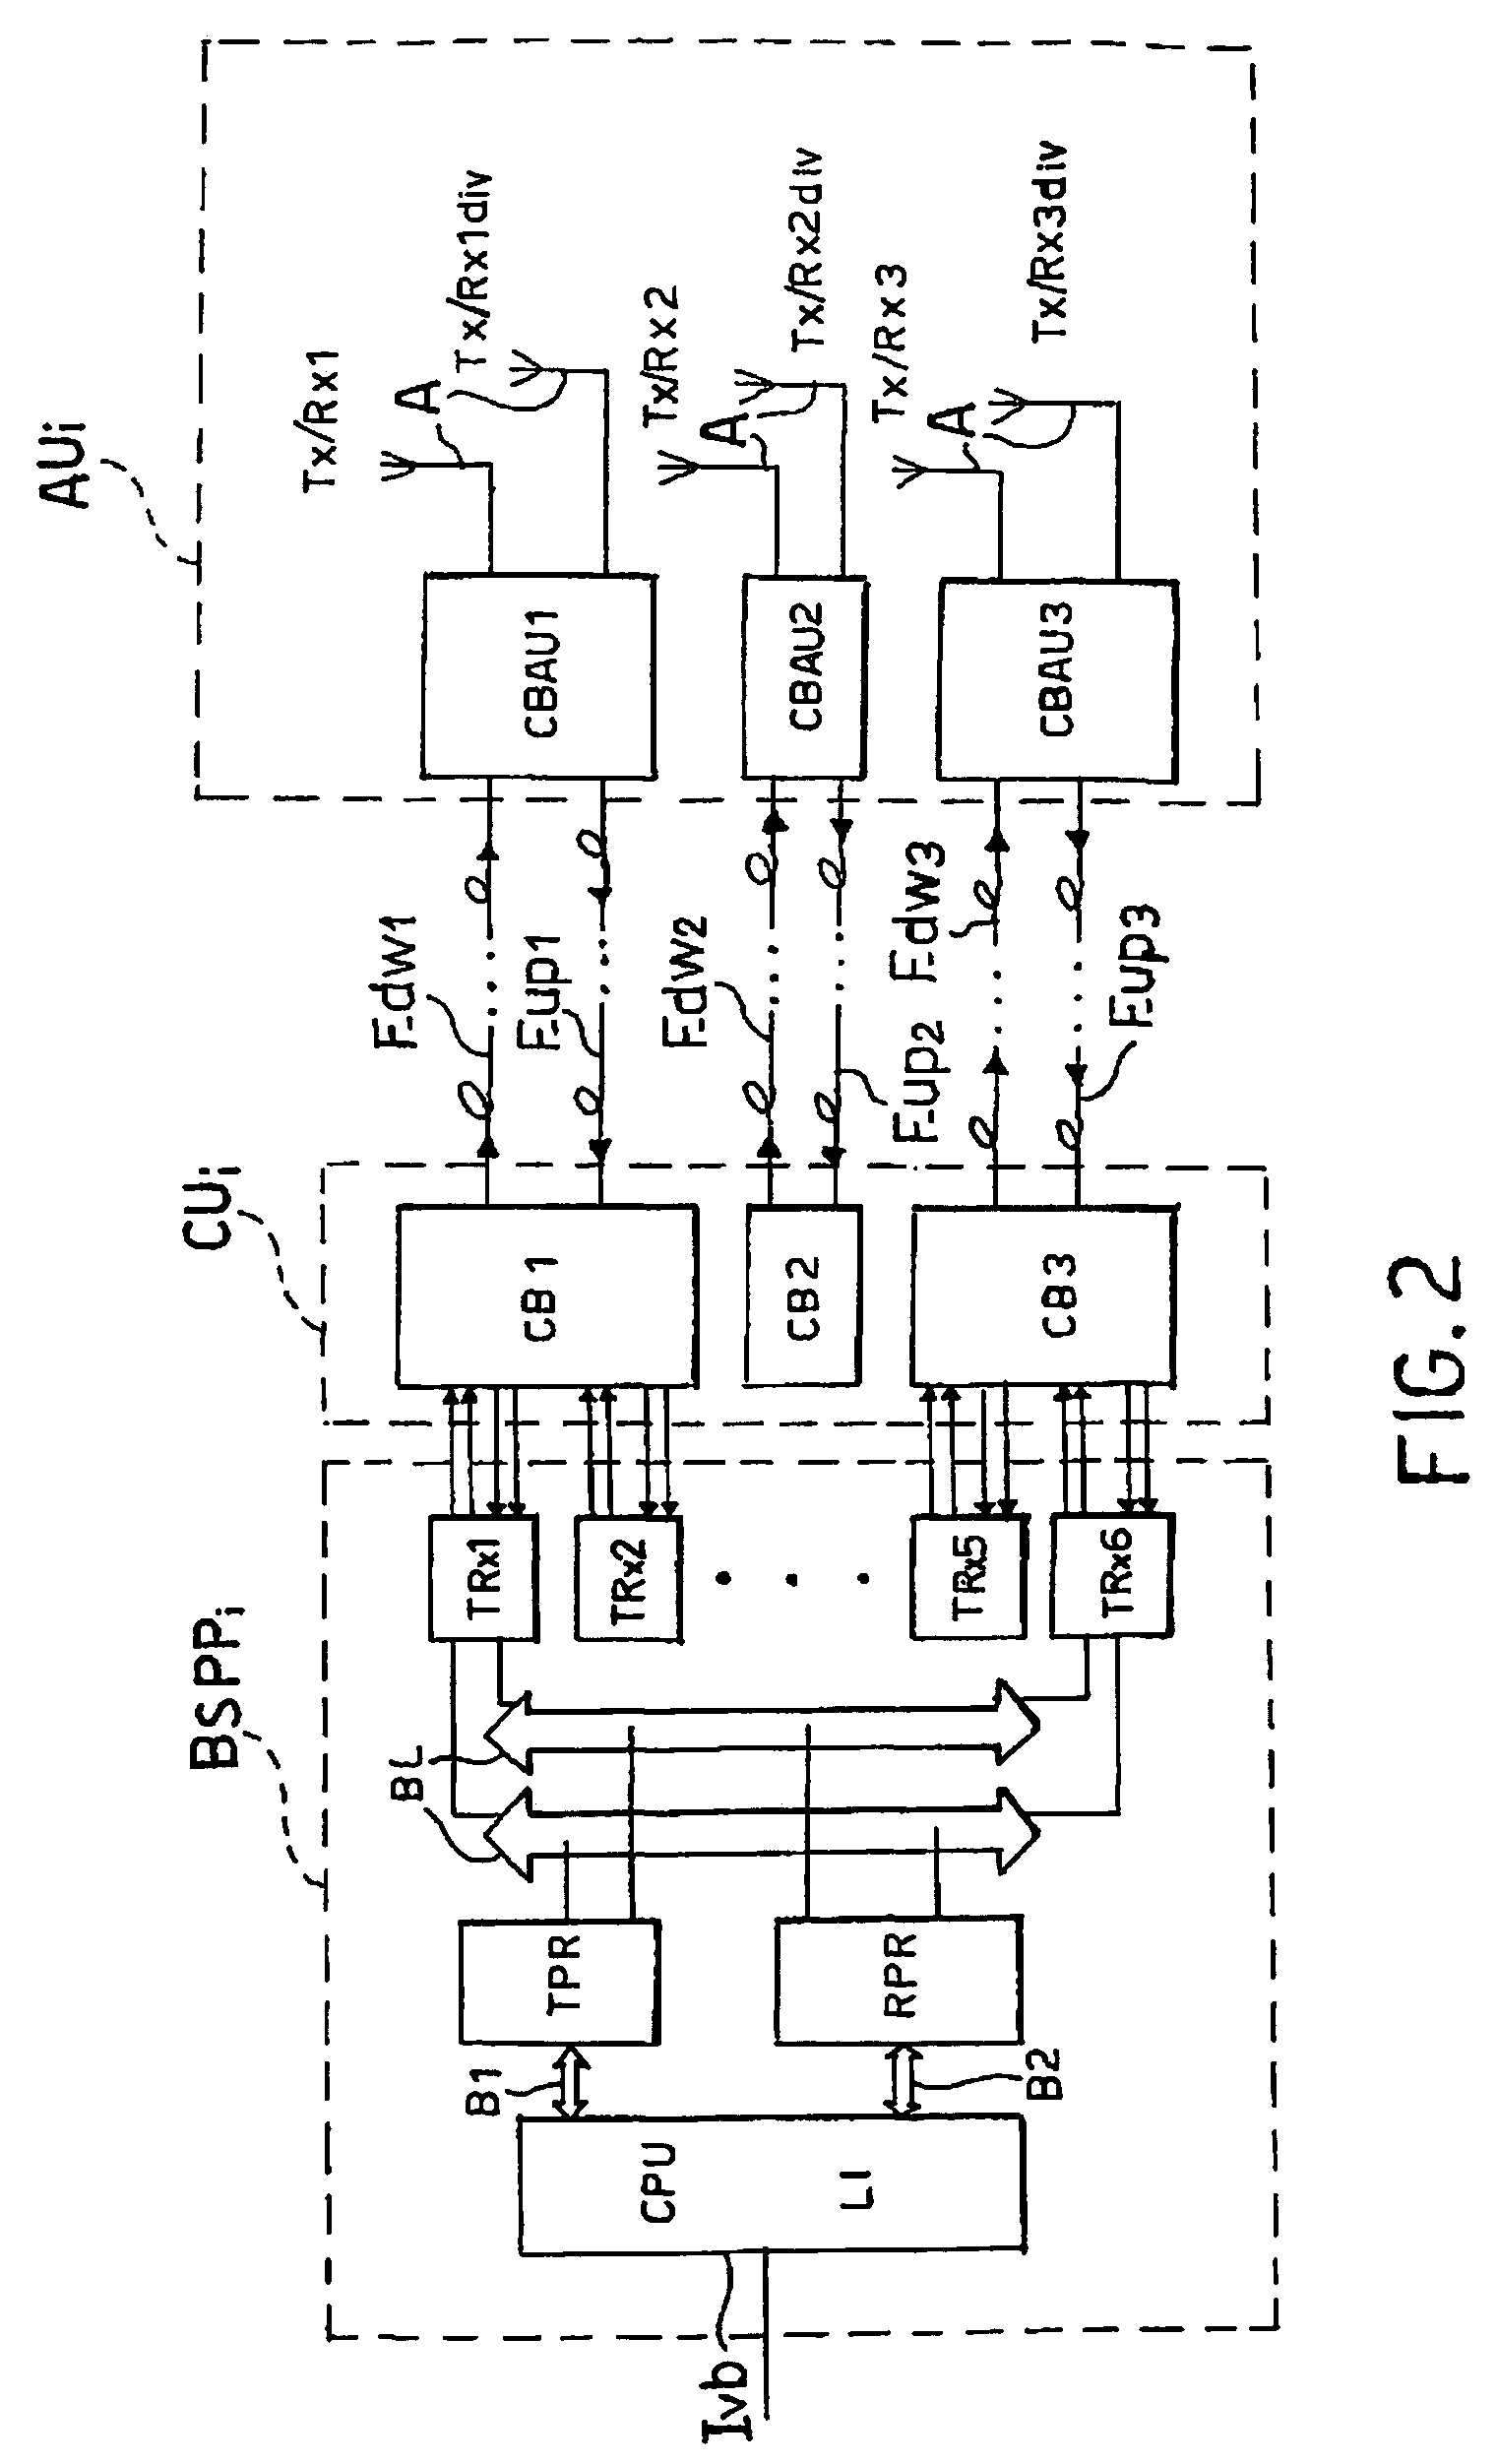 Radio base station receiver having digital filtering and reduced sampling frequency